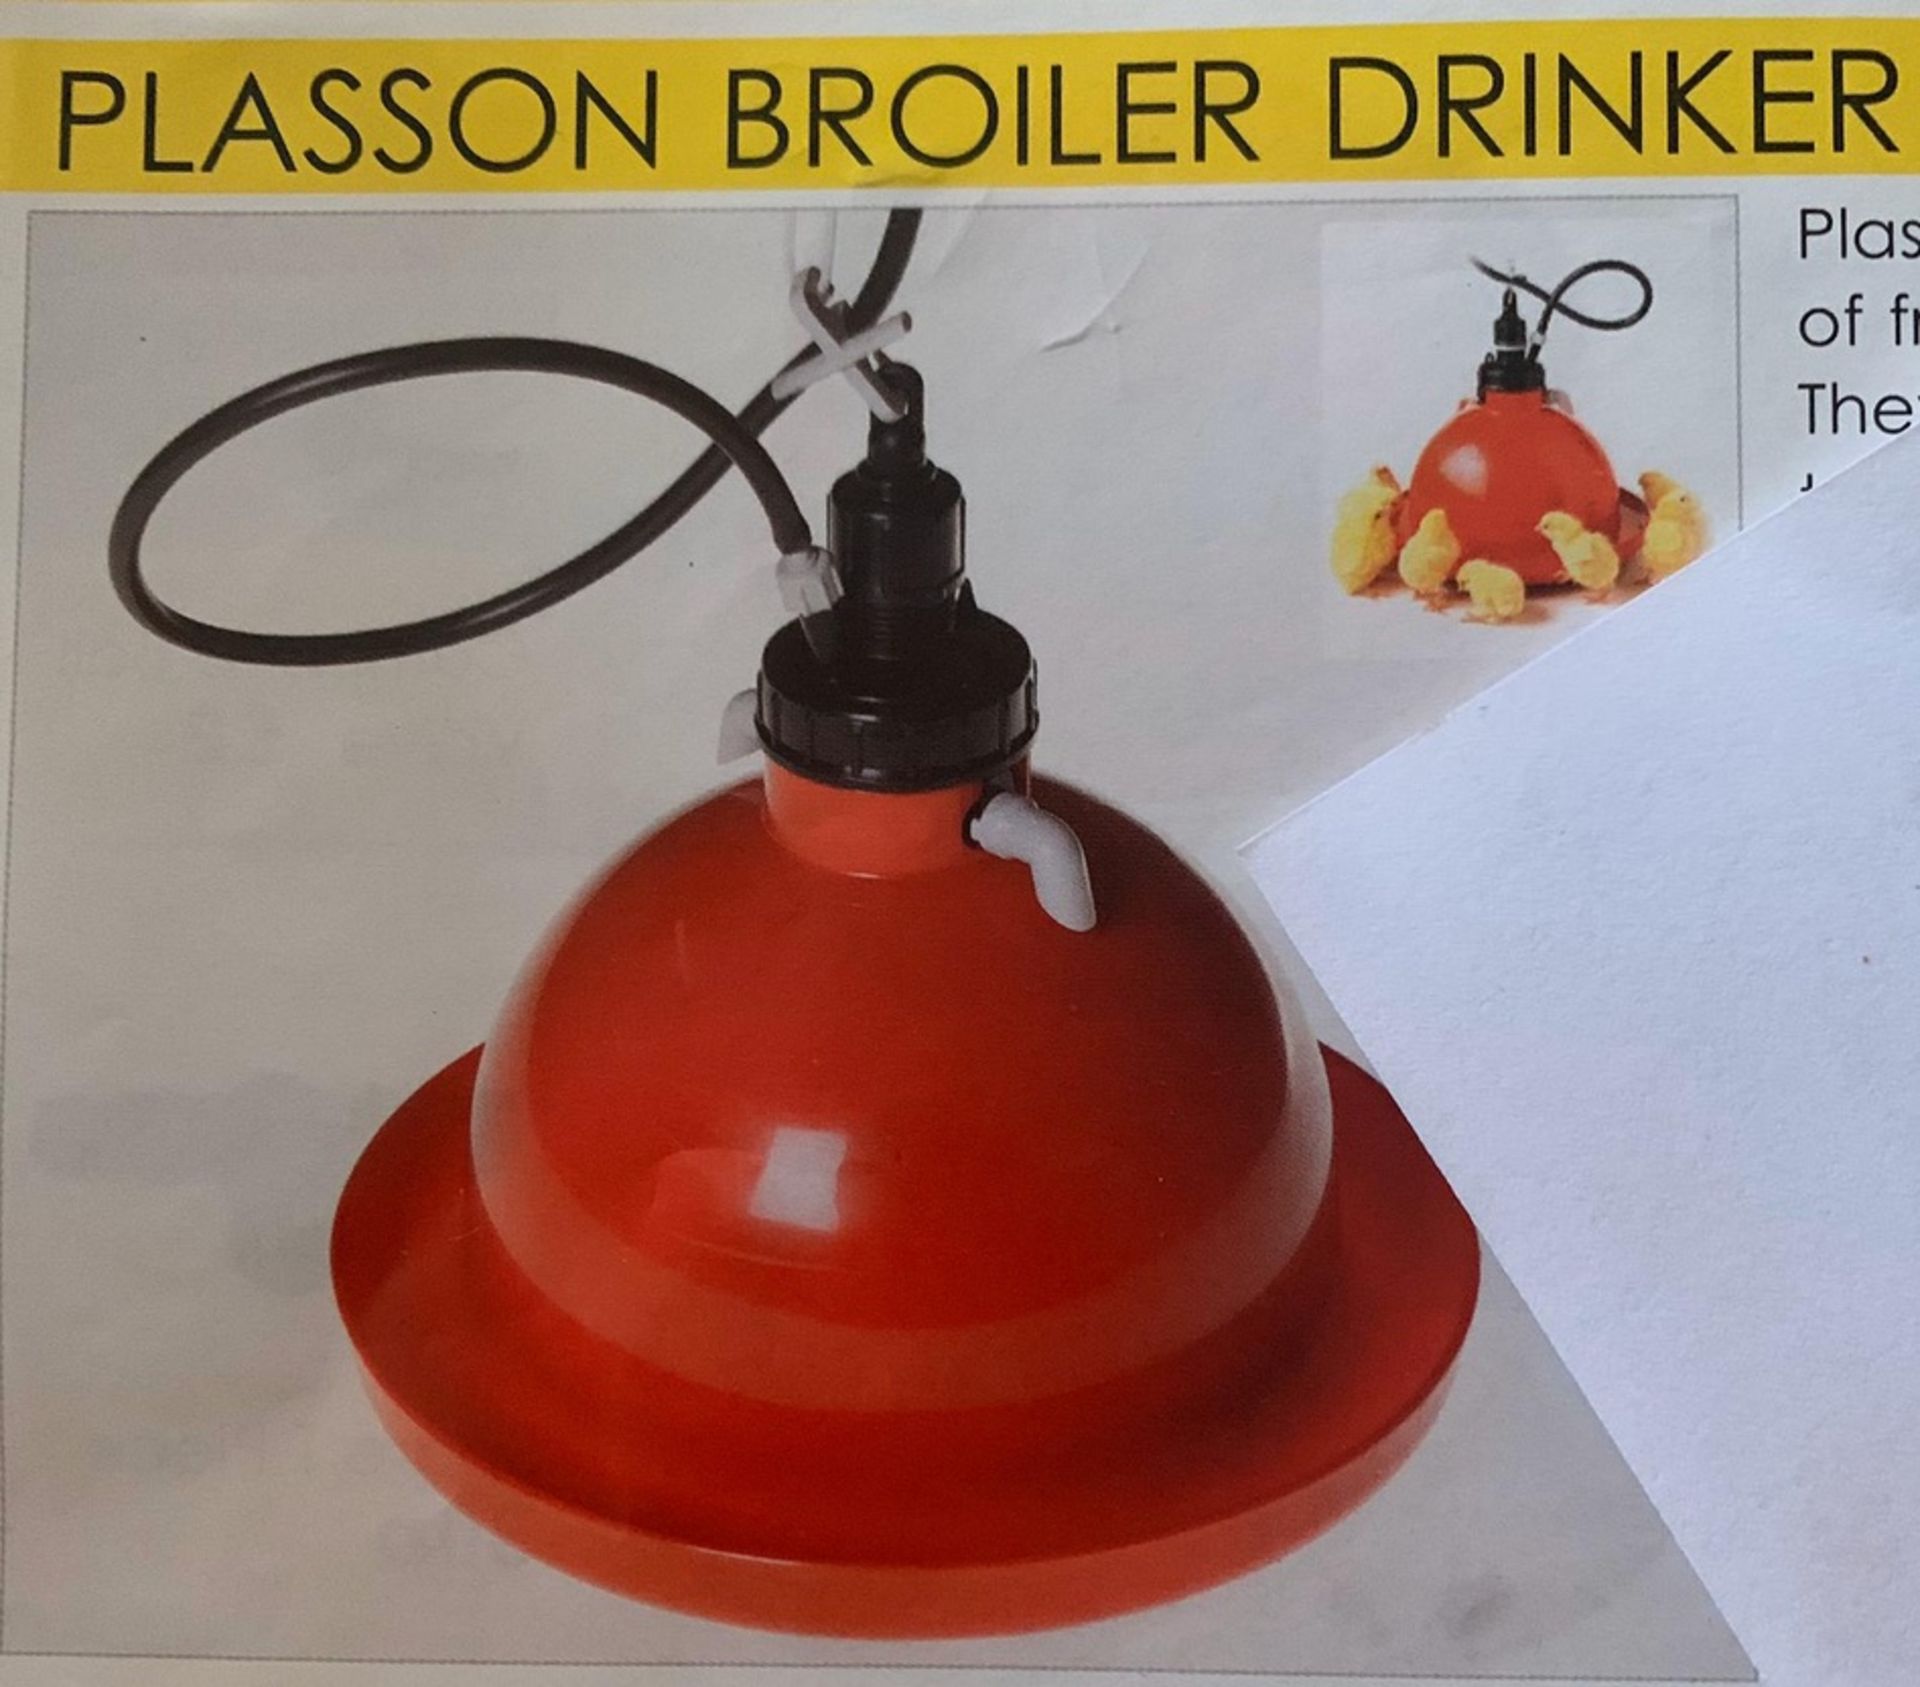 10 x Plasson broiler drinkers complete with valves